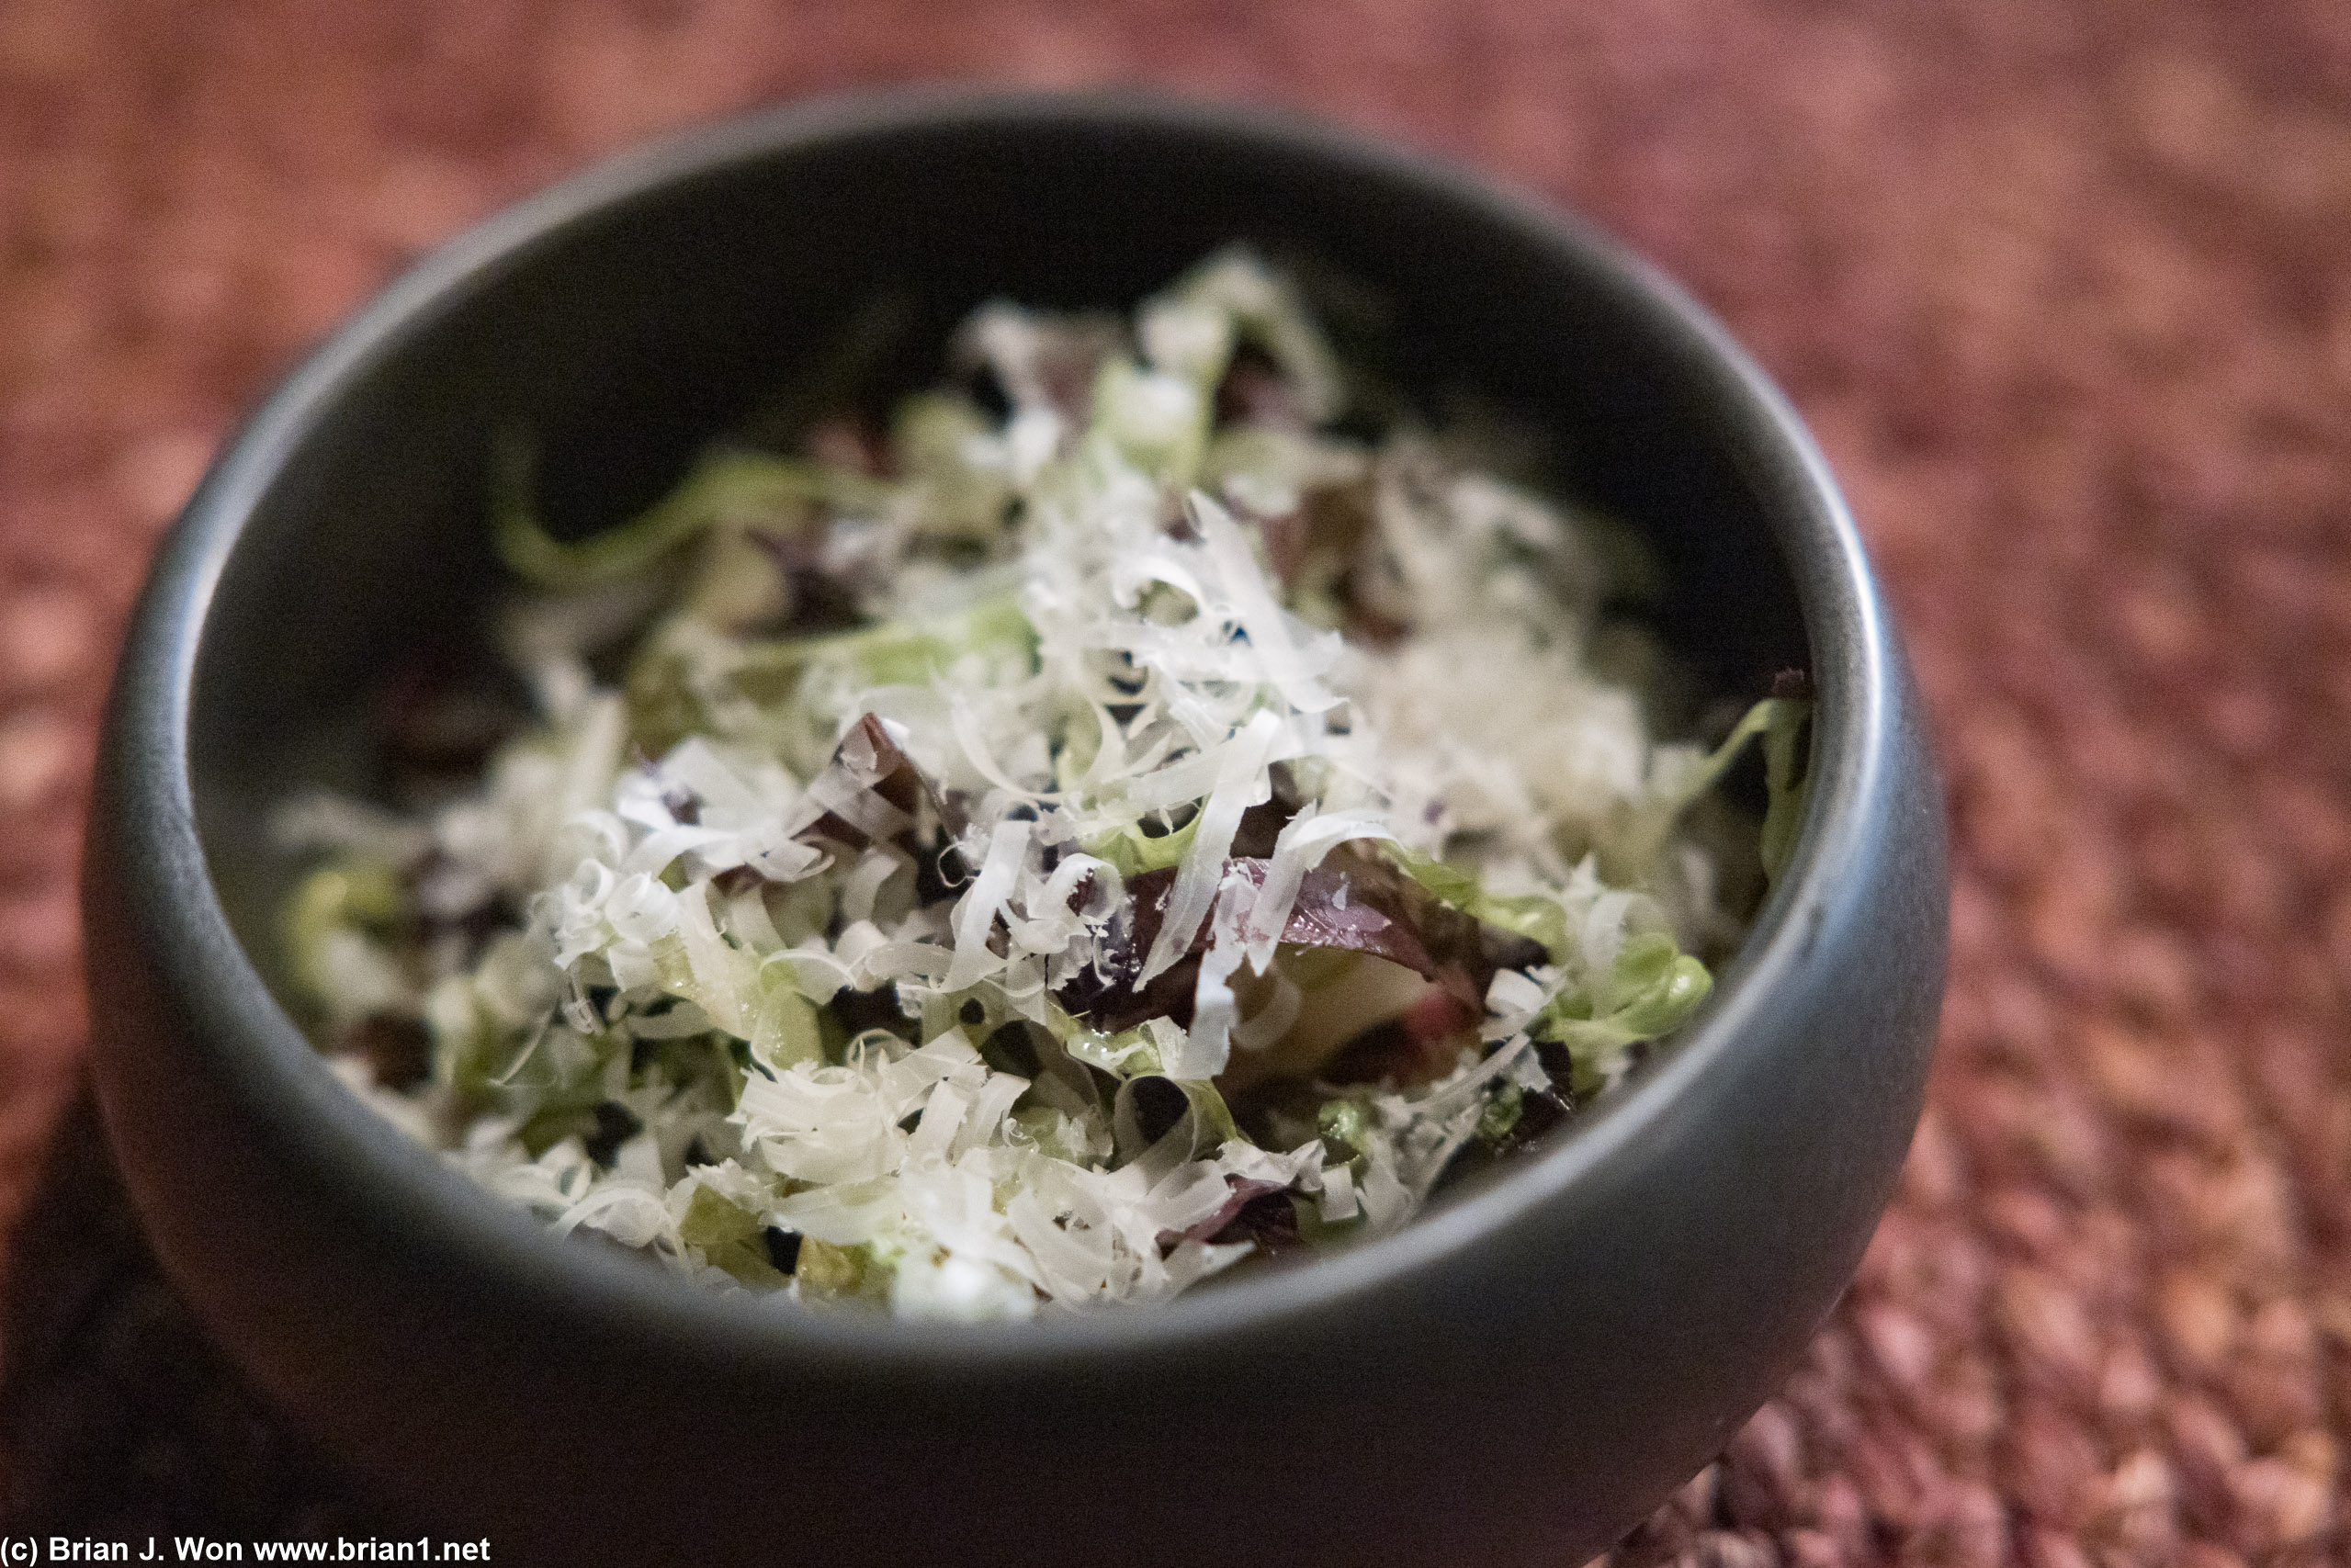 Compressed cabbage is a wonderfully delicate flavor, paired with a very mild cheese.